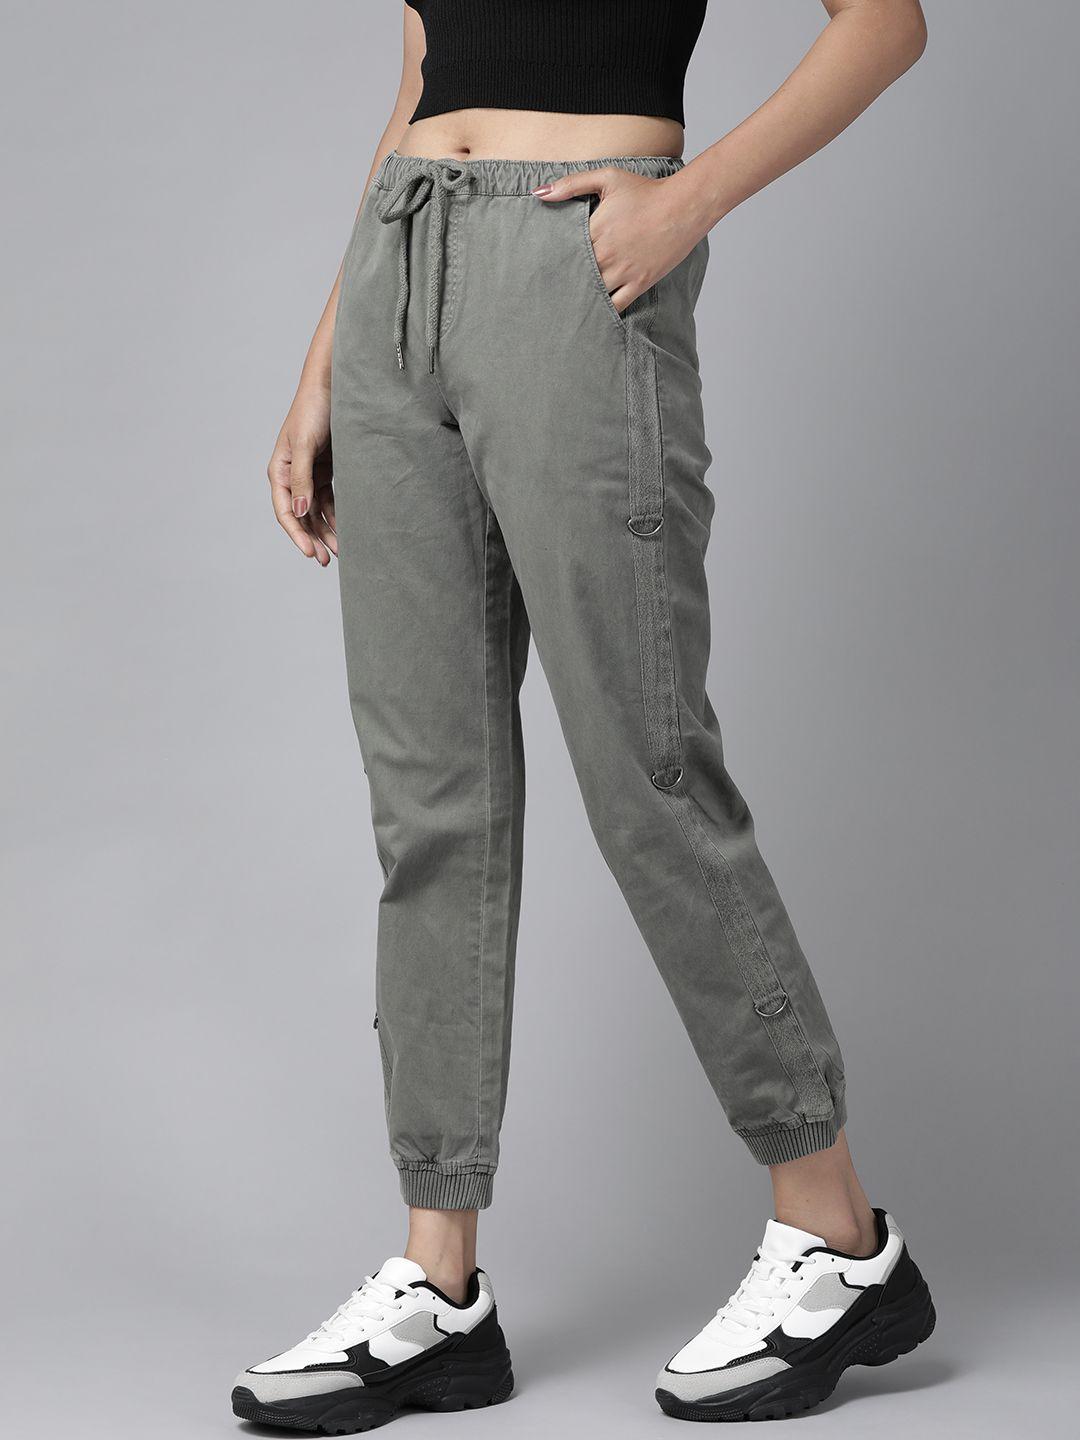 the roadster lifestyle co women olive green jogger sustainable trousers